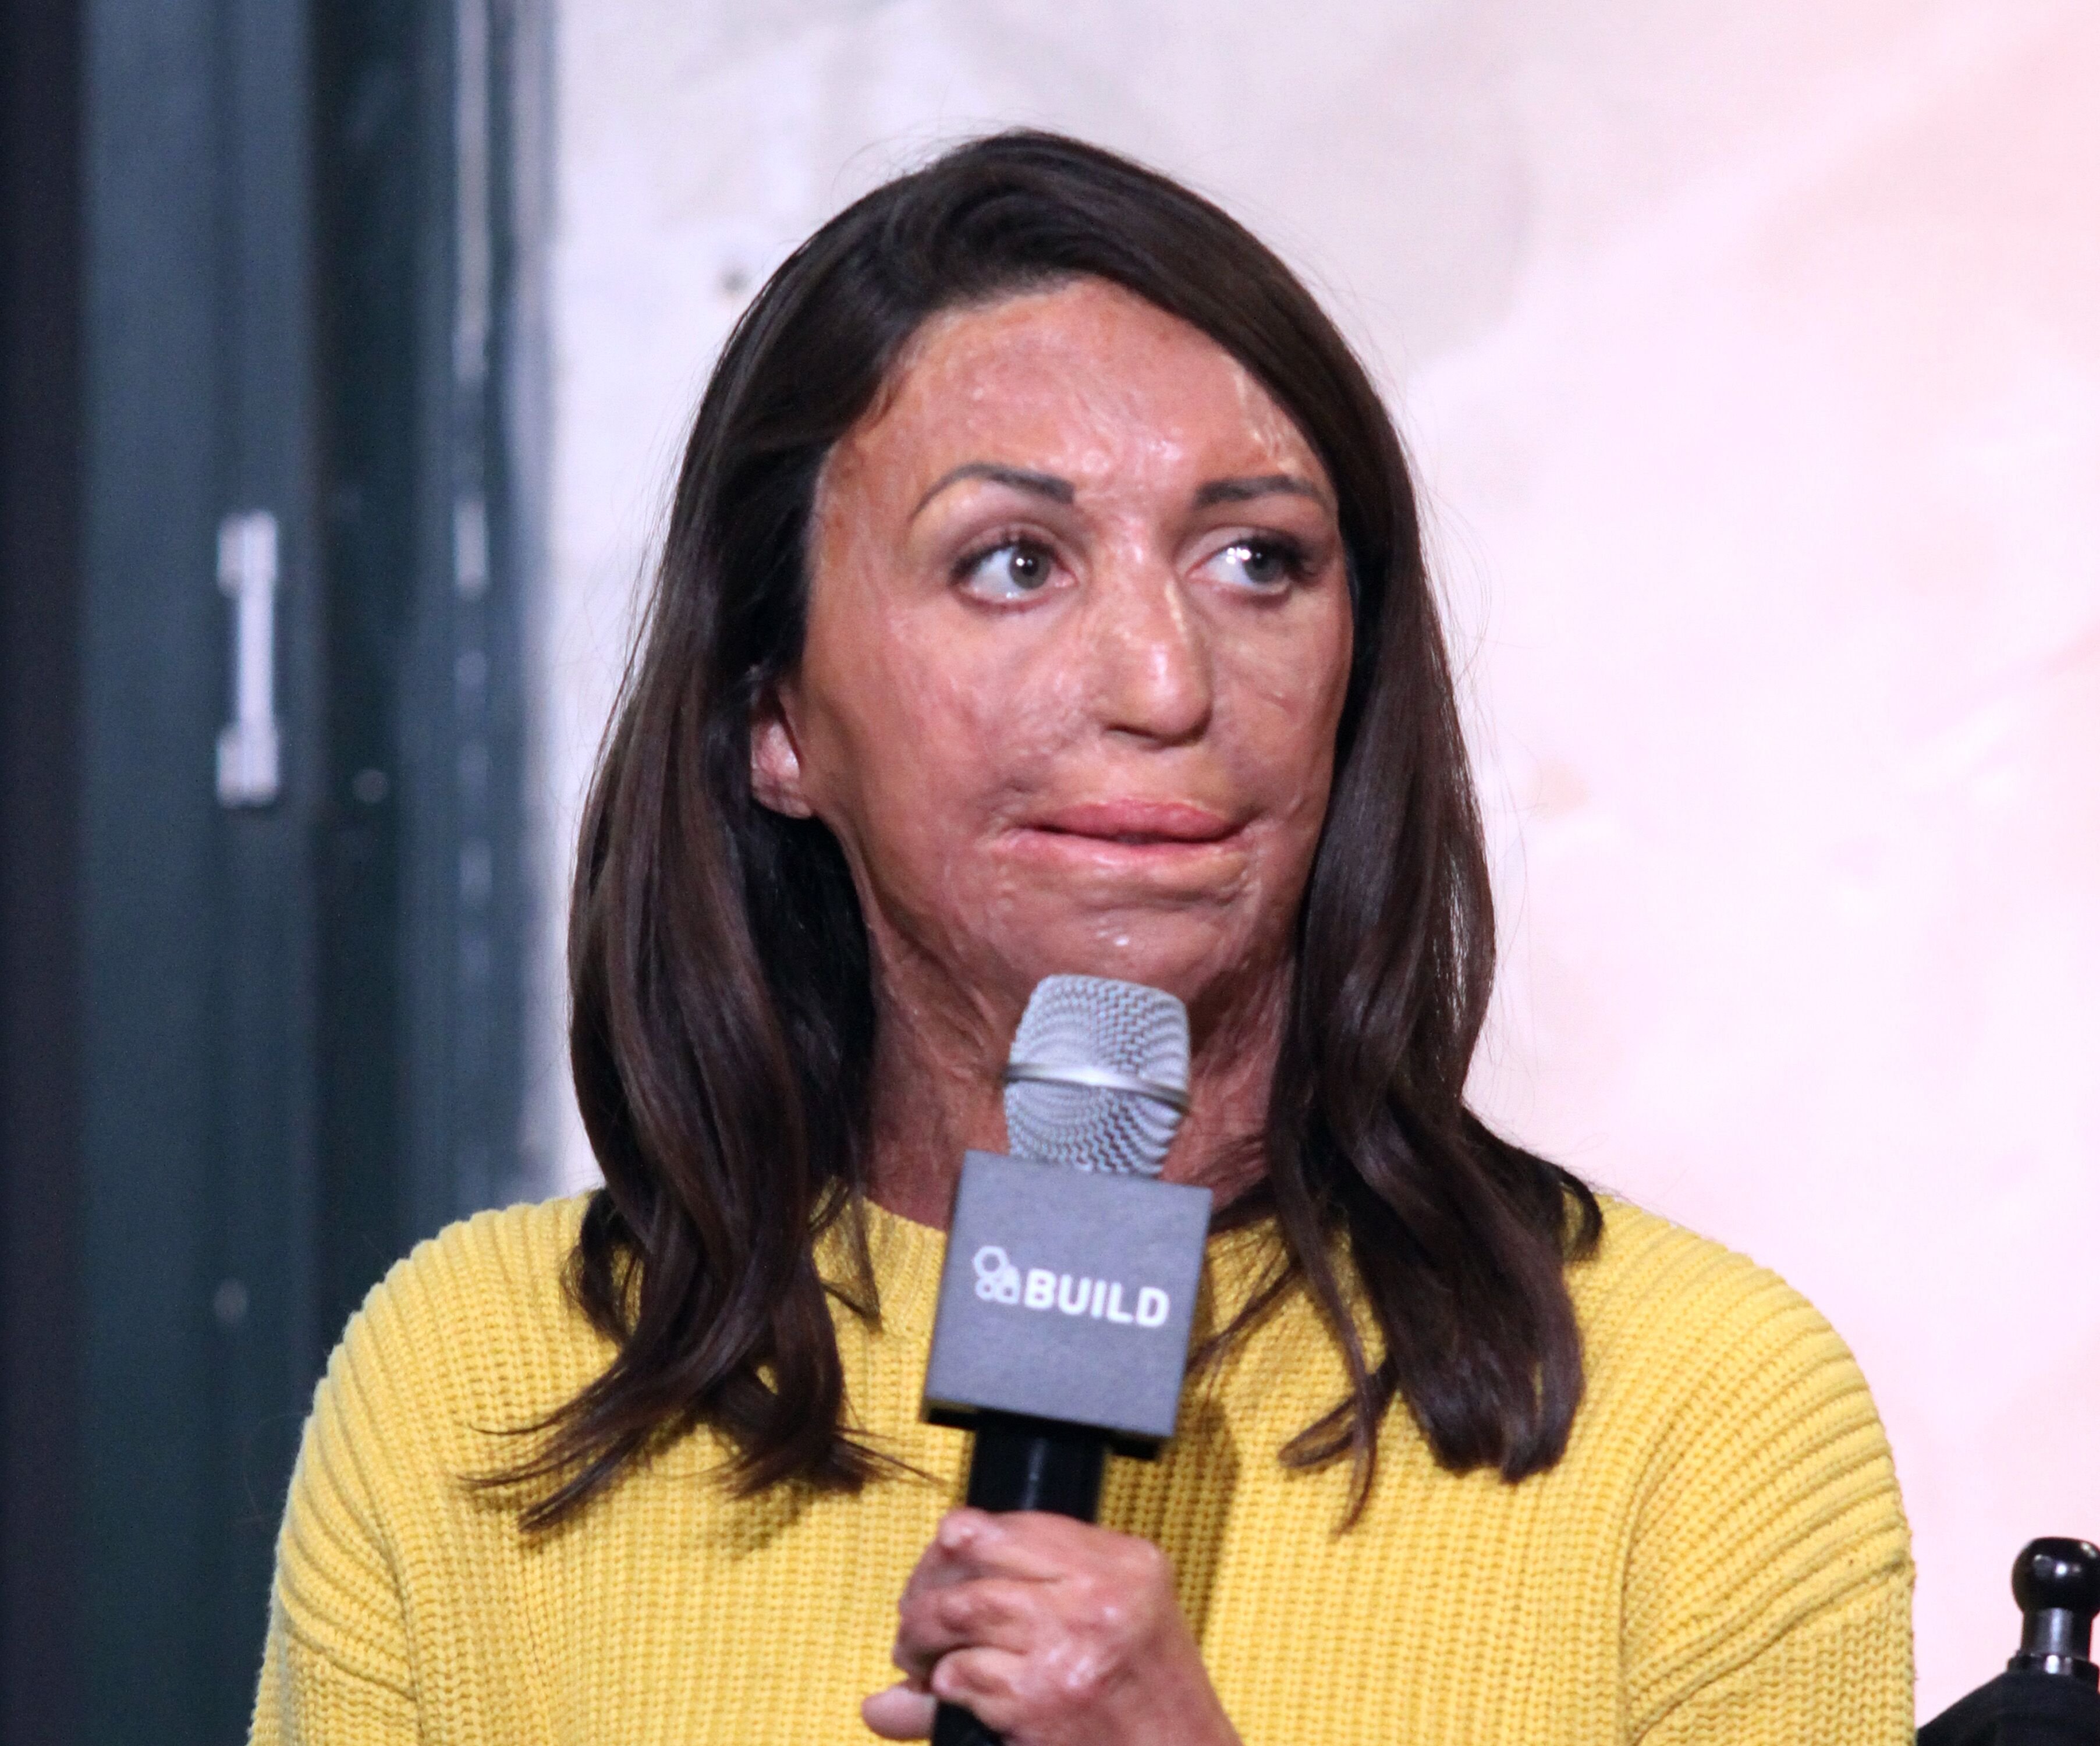 Turia Pitt appears to promote the "Ironman World Championship" during the AOL BUILD Series at AOL HQ on December 6, 2016 in New York City. | Source: Getty Images